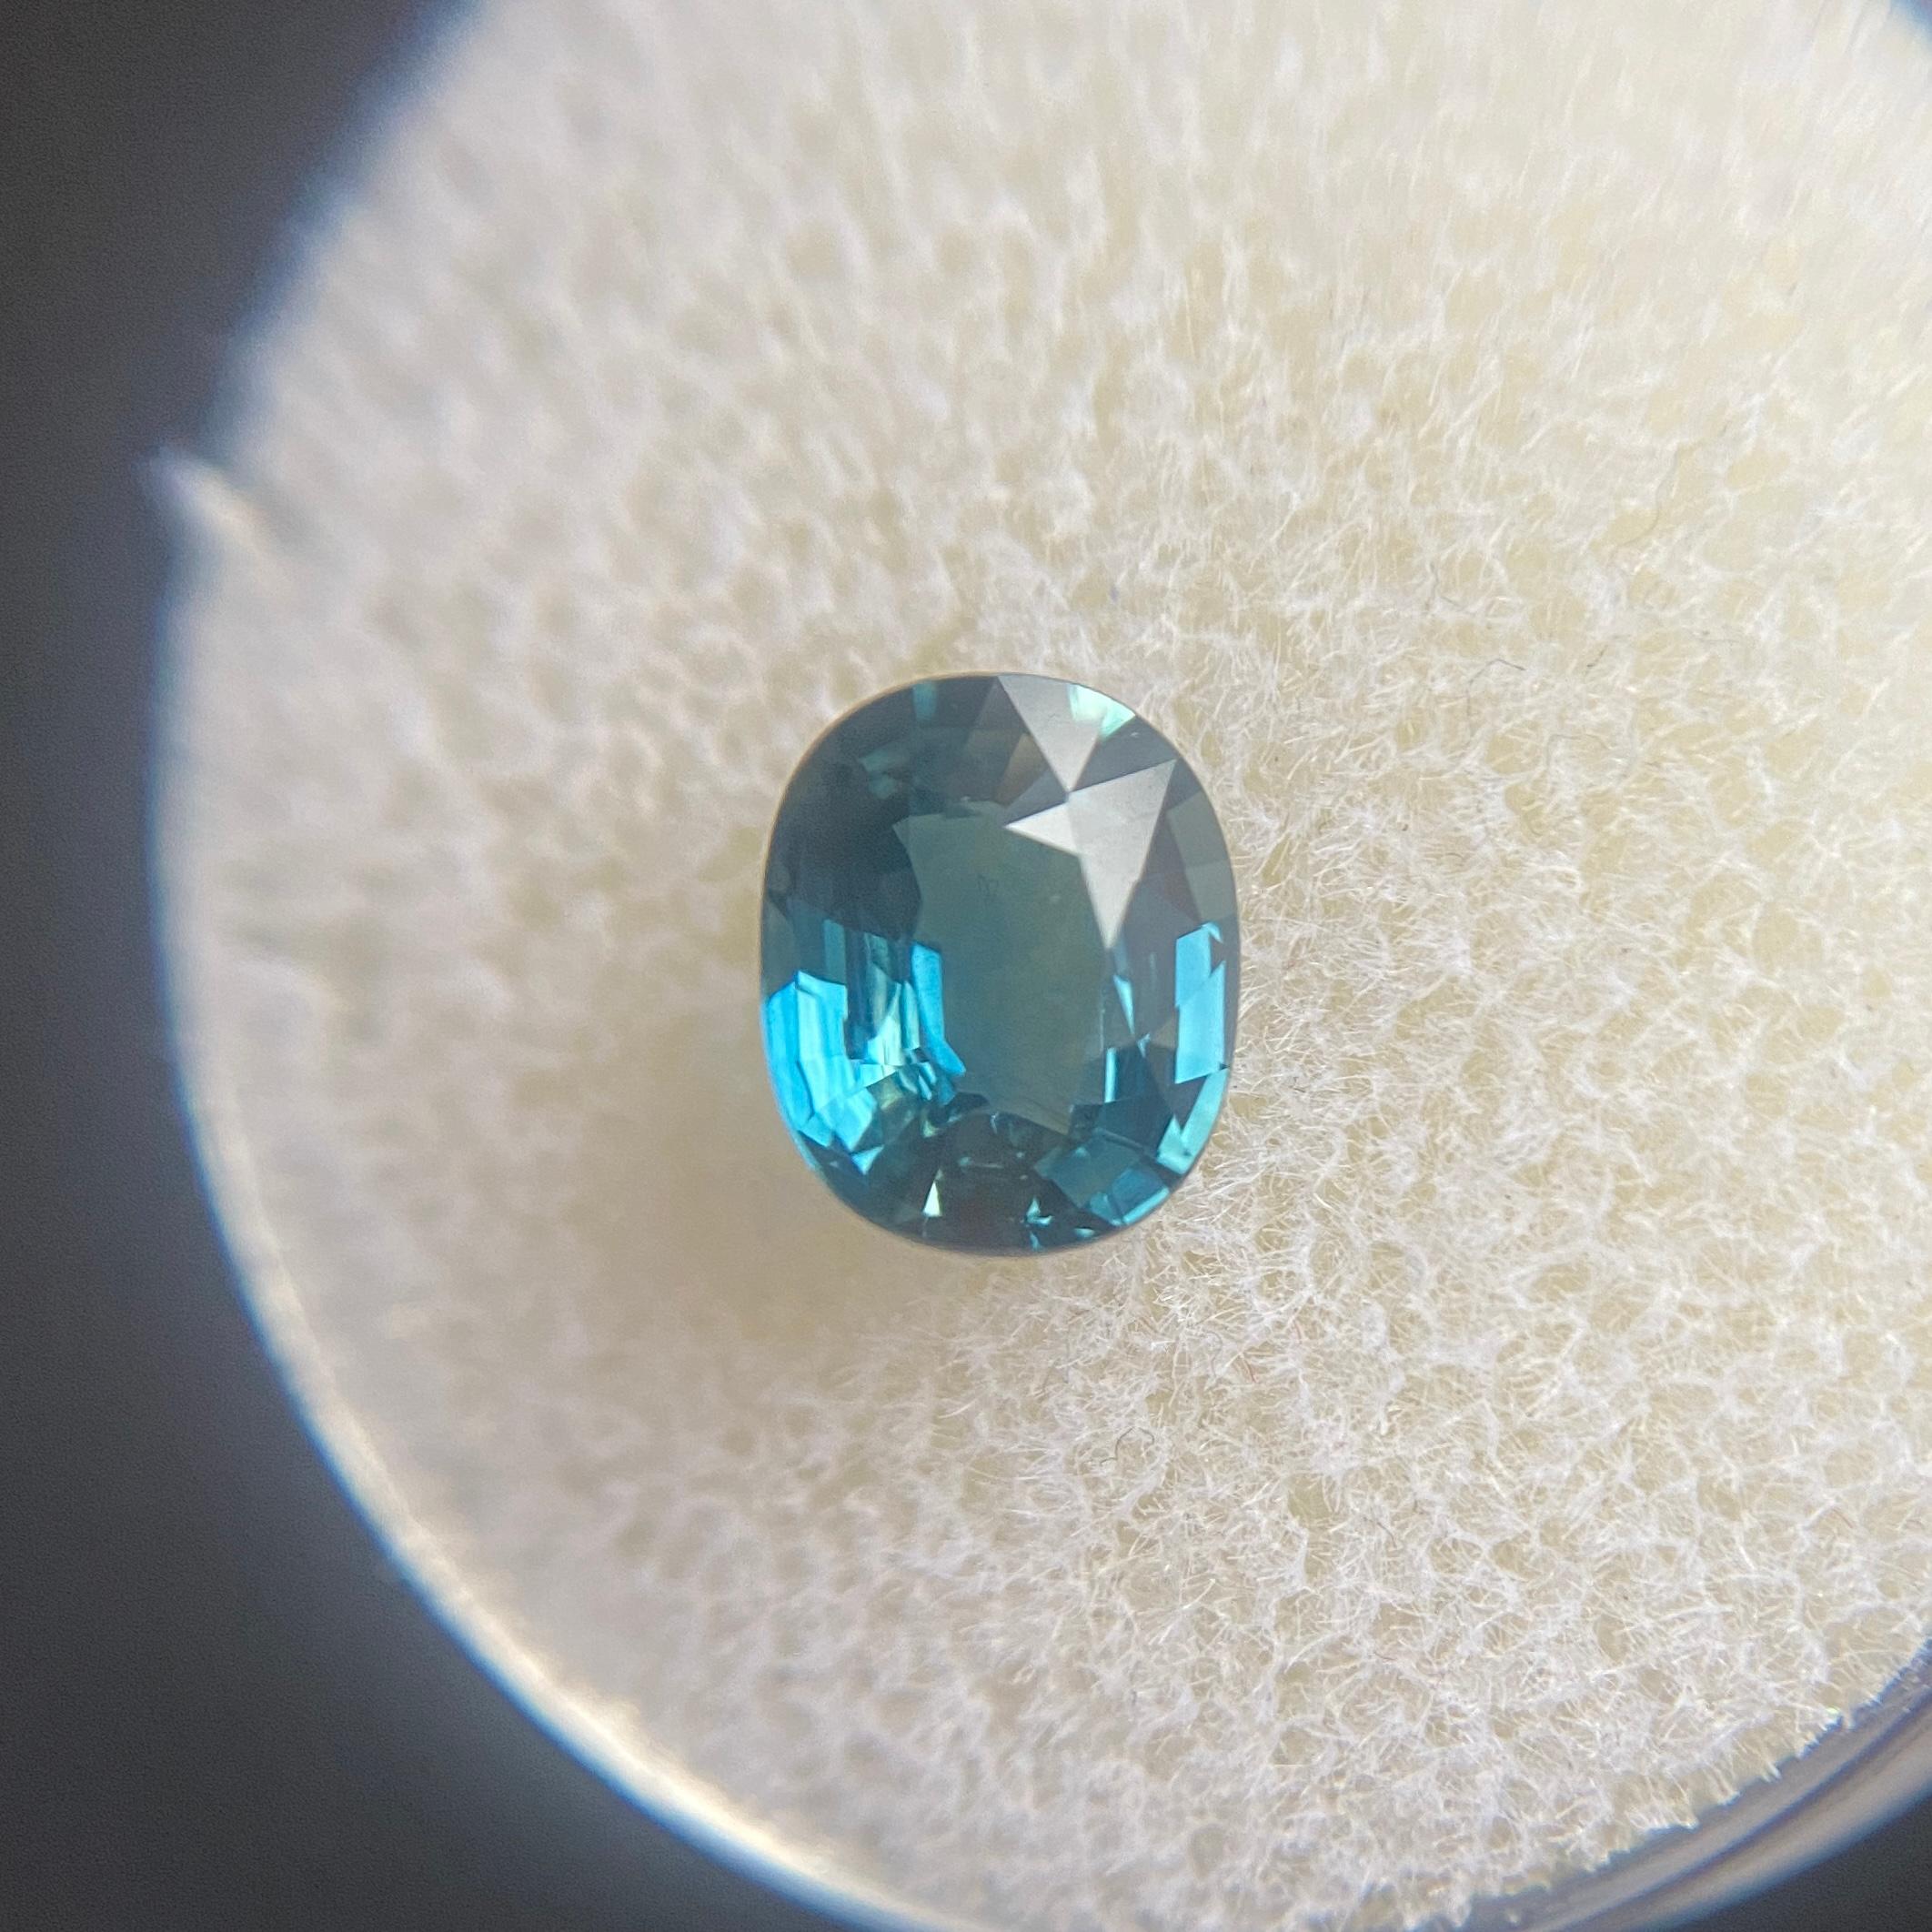 Natural Indigo Blue Australian Sapphire Gem.

1.35 Carat with a beautiful and unique ‘indigo’ blue colour. Very rare and stunning to see. Also has excellent clarity, a very clean stone.

With an excellent oval cut and polish to show great shine and